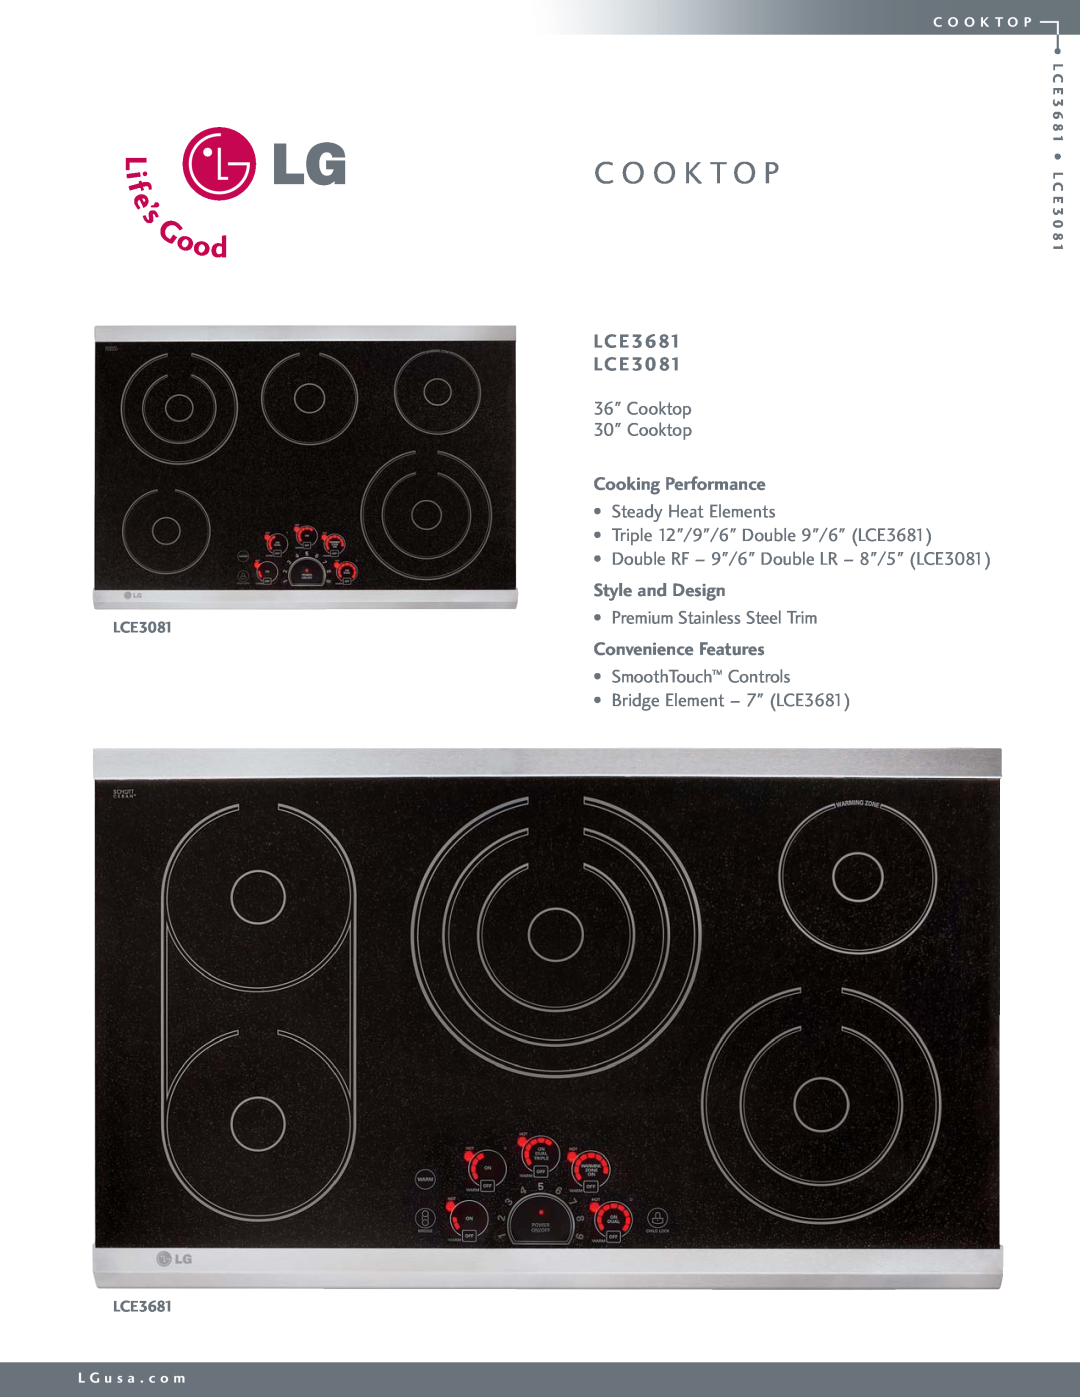 LG Electronics LCE3081 manual C O O K T O P, Lc E Lc E, Cooktop 30 Cooktop, Cooking Performance, Steady Heat Elements 